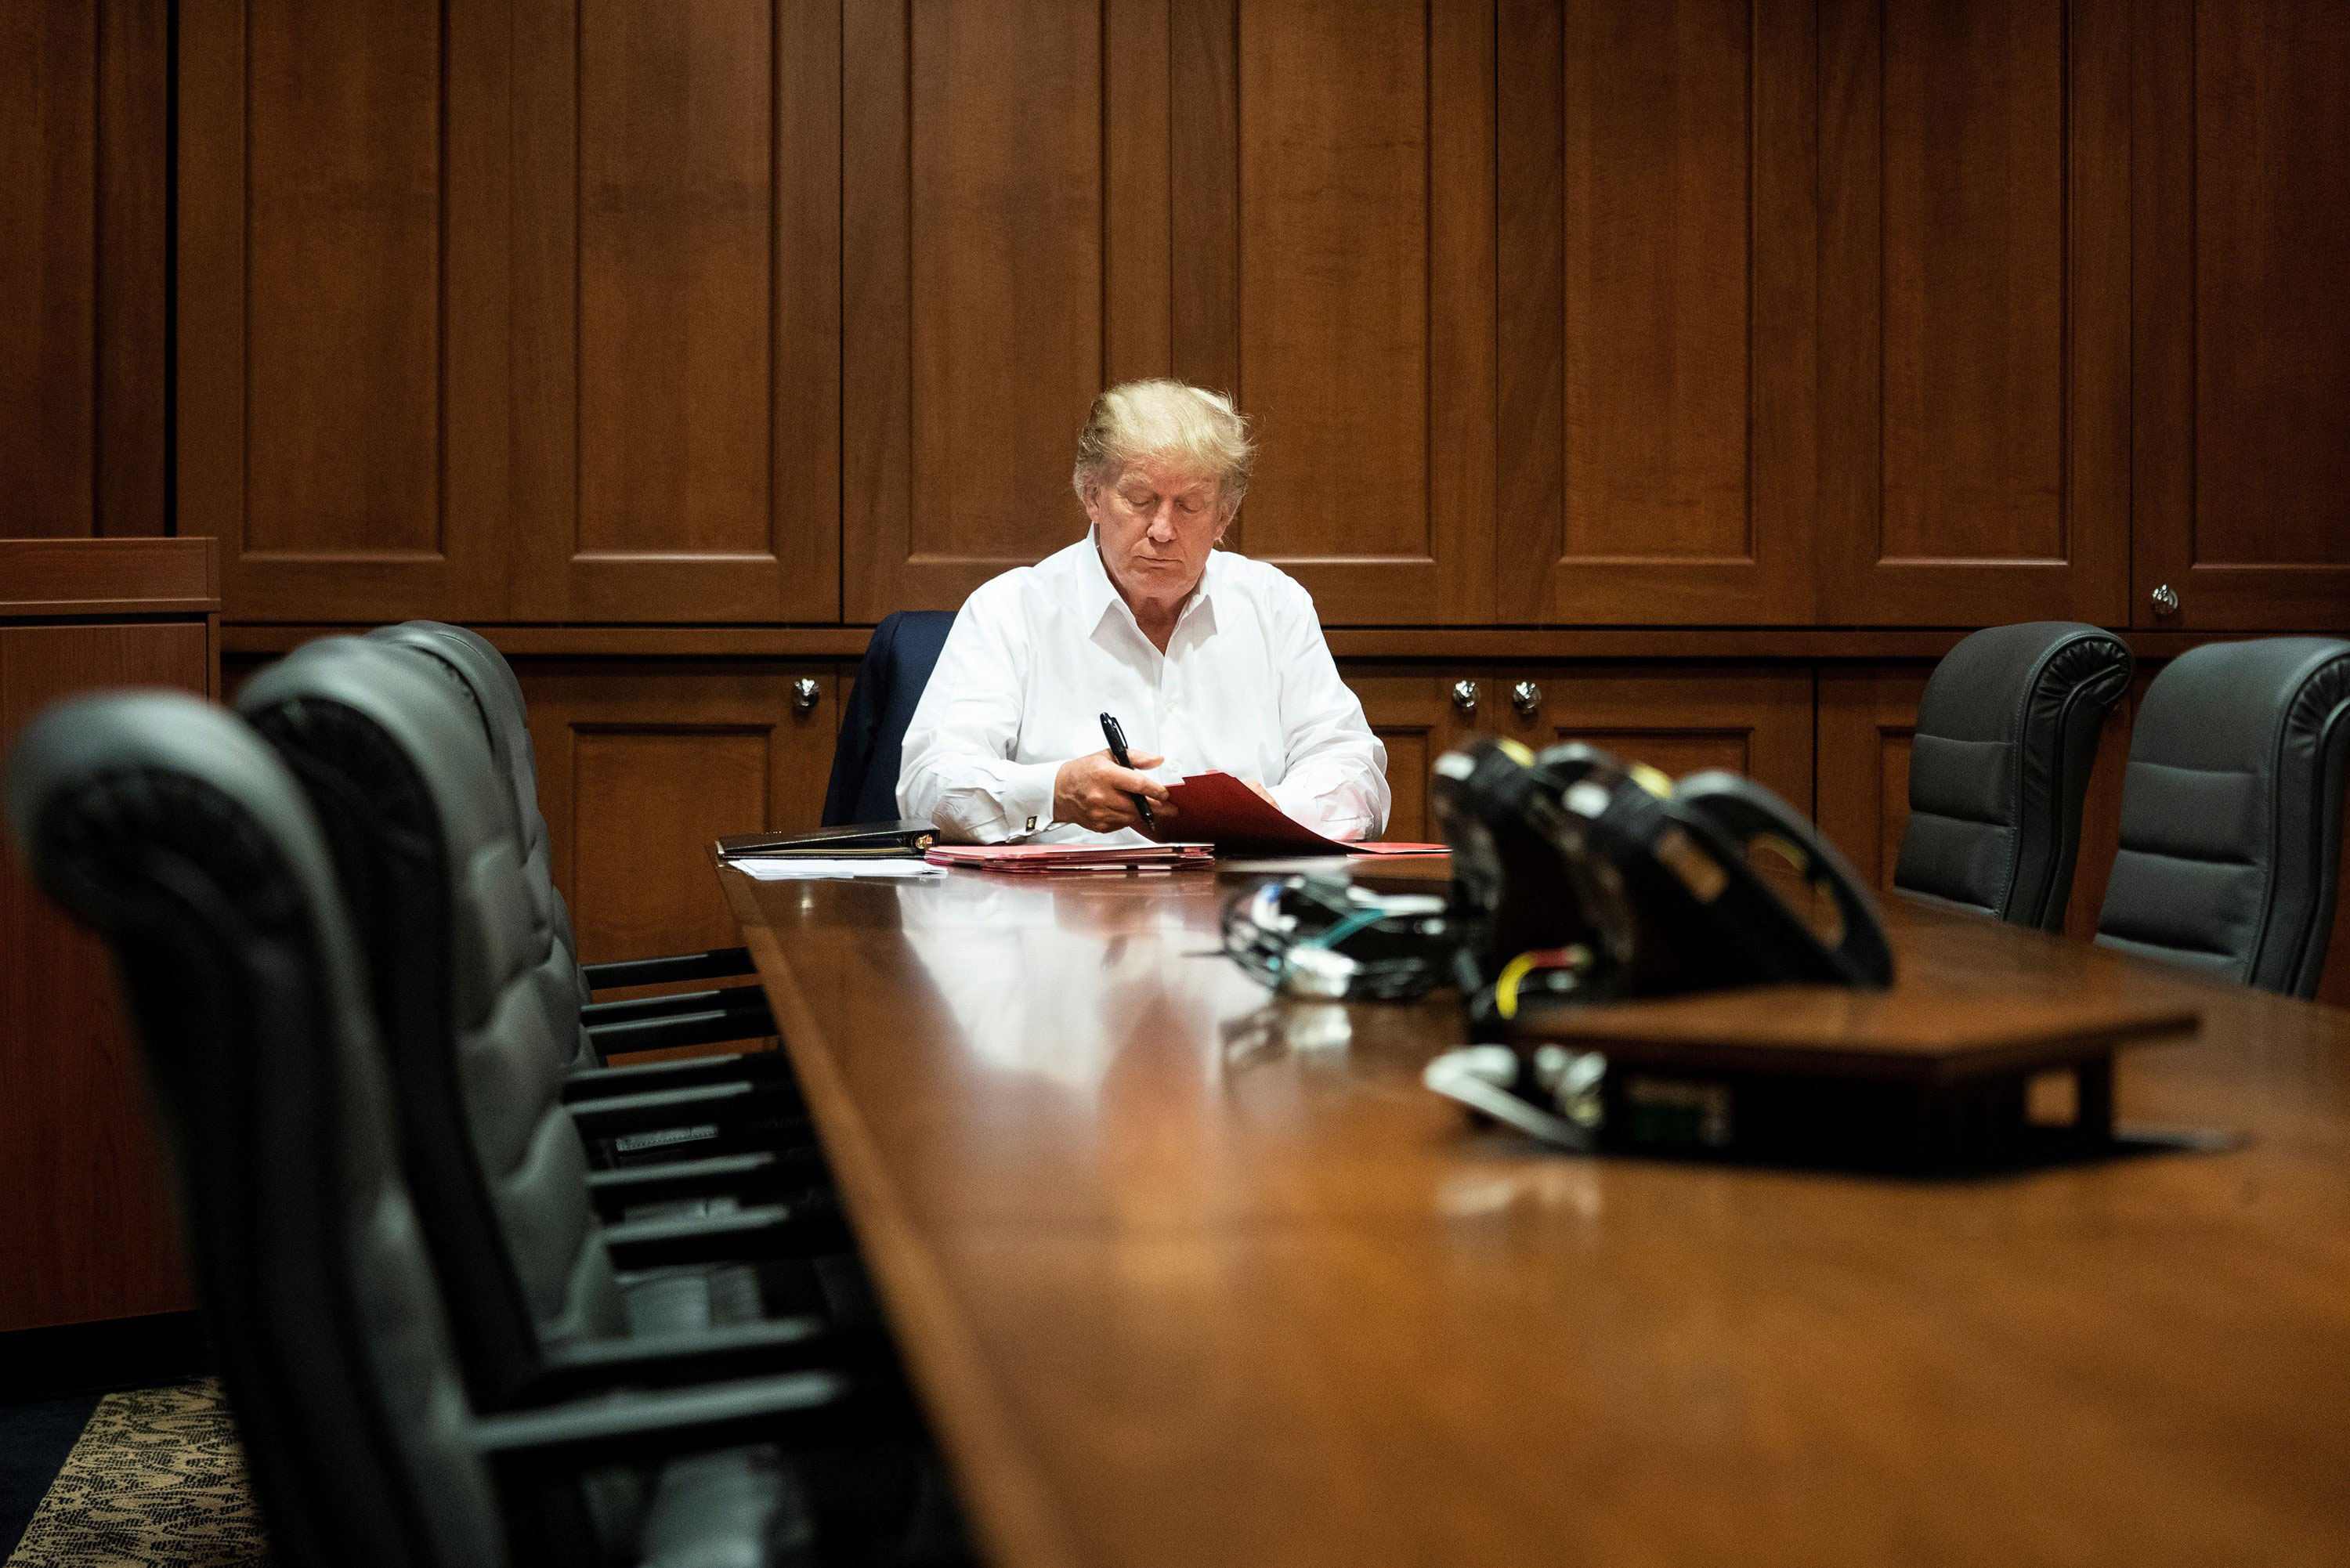 President Donald Trump works in the Presidential Suite at the Walter Reed National Military Medical Center in Bethesda, Maryland on Saturday, October 3.